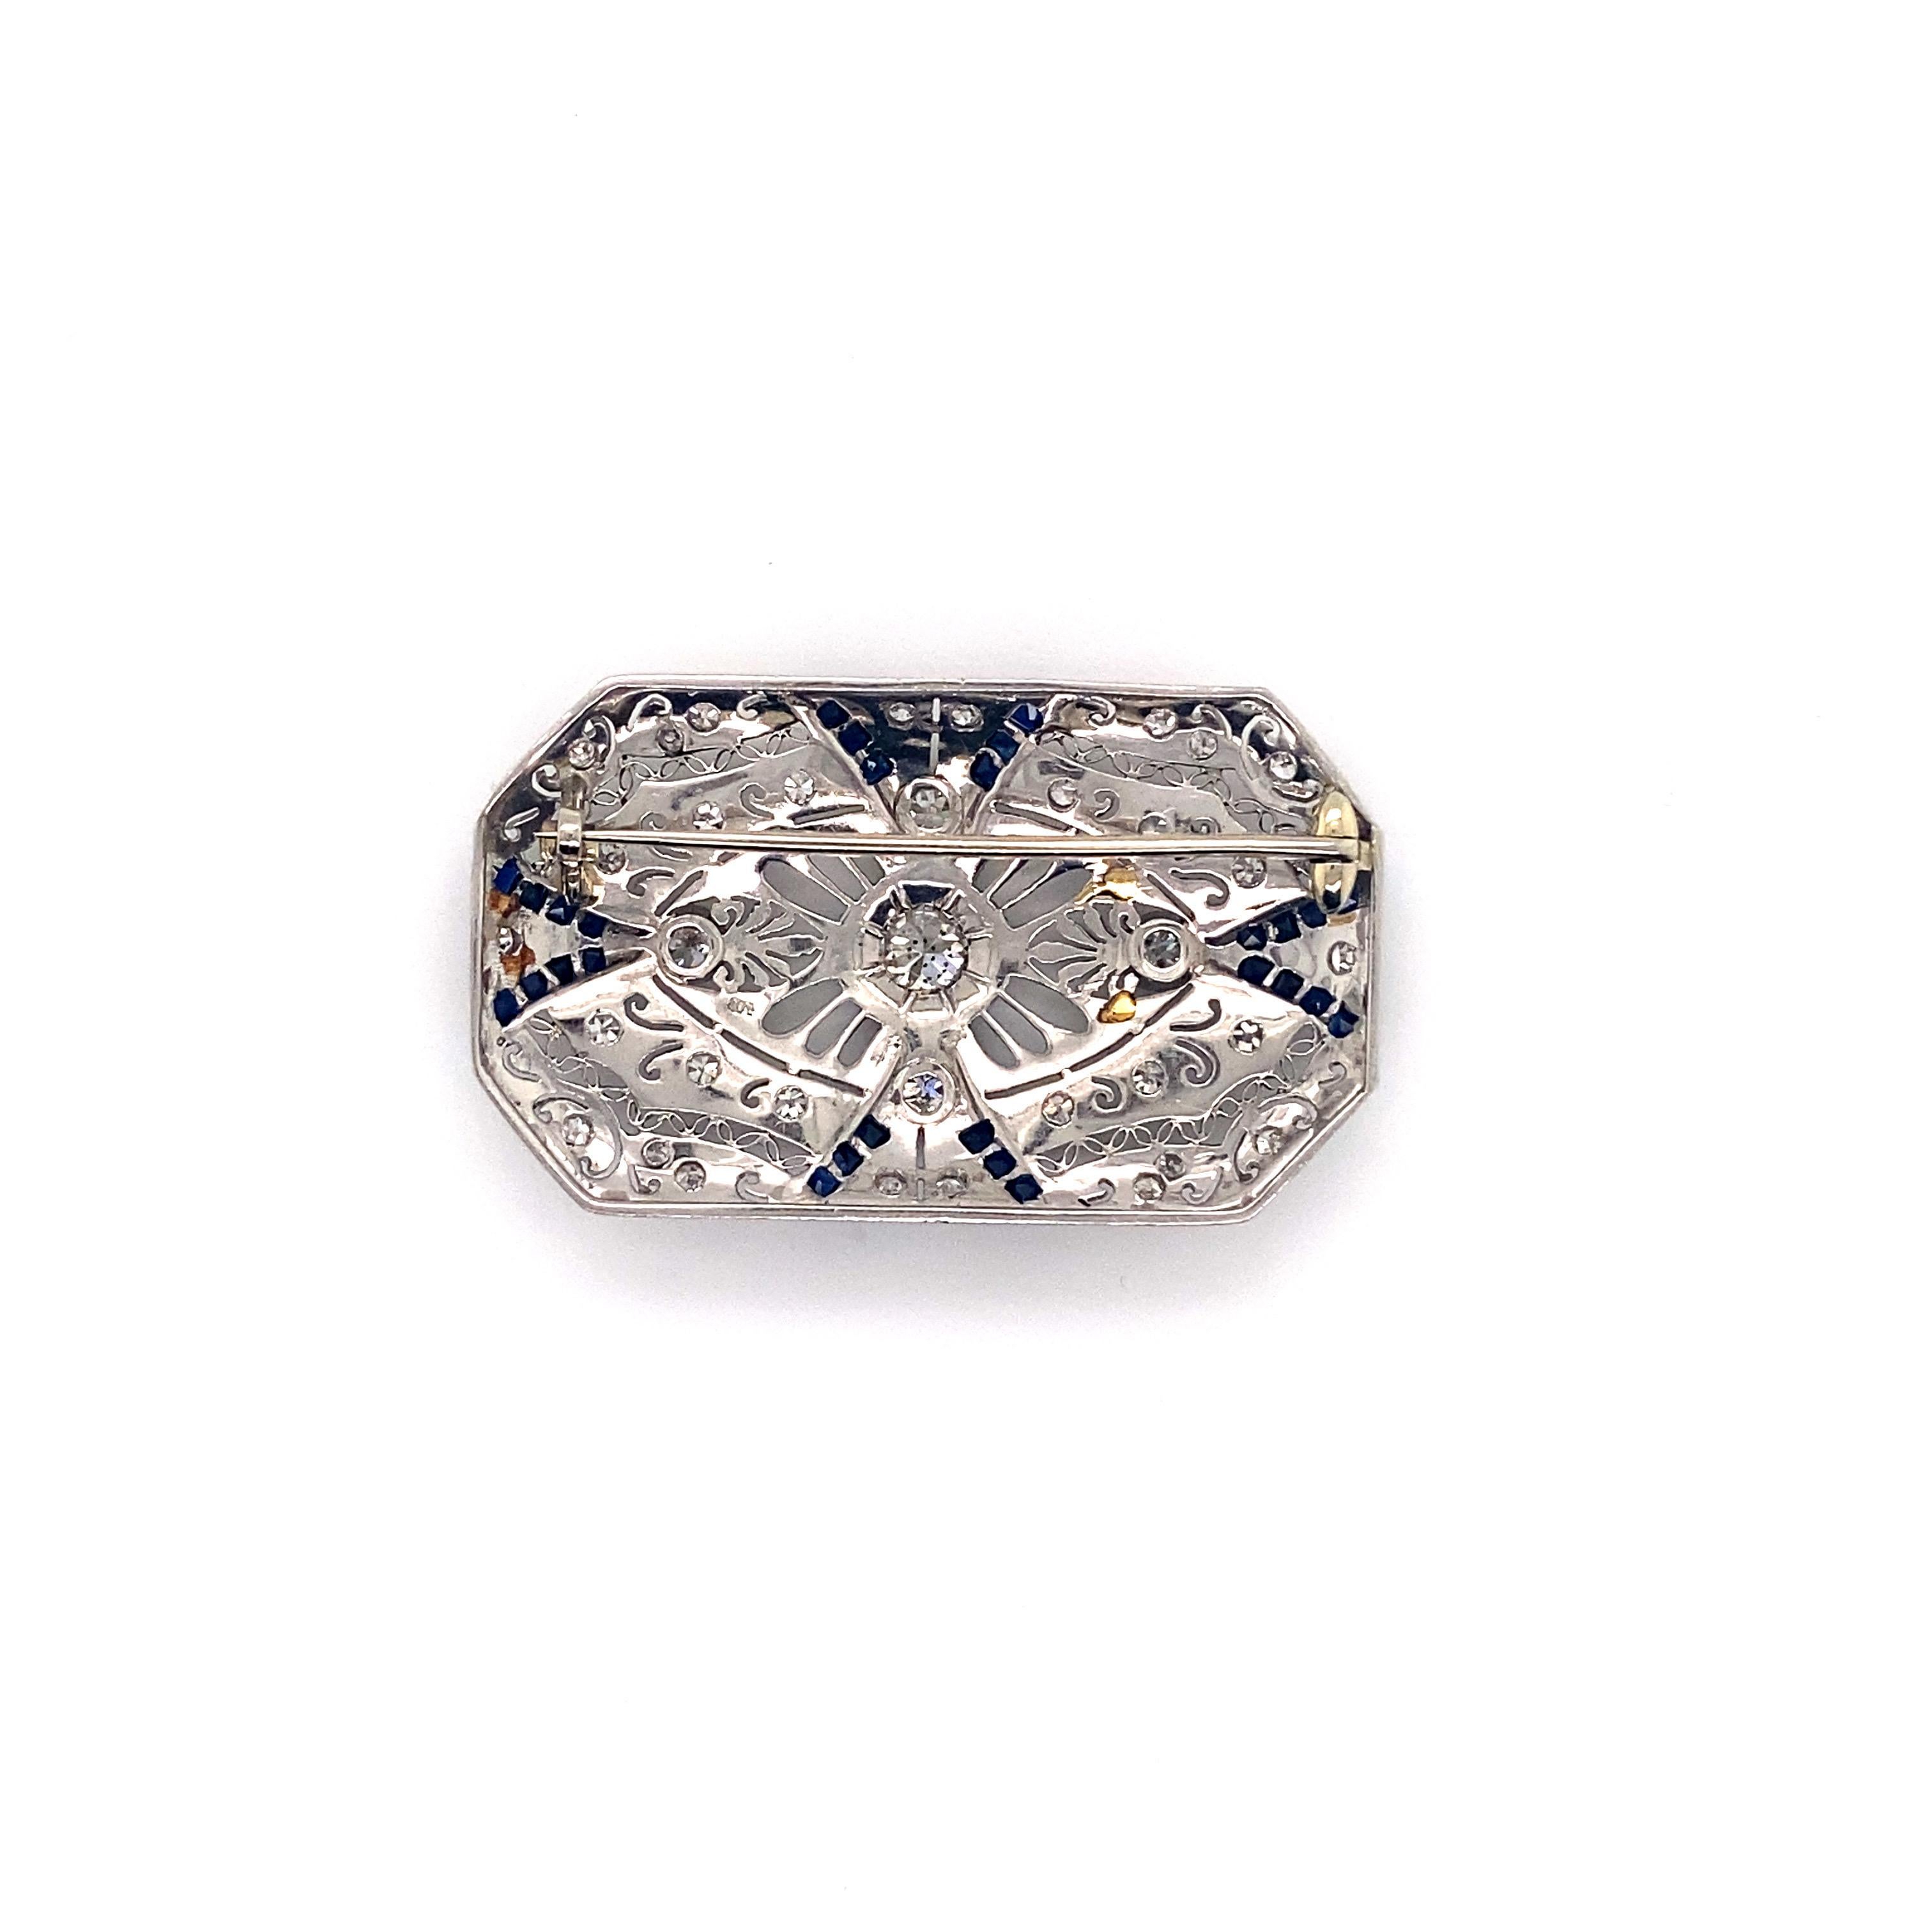 Vintage Edwardian Platinum Diamond and Sapphire Filigree Brooch - The center Eurpopean cut diamond is set in a hexagon plate and weighs approximately .50ct. There are 4 European cut diamonds set in bezels and weigh approximately .40ct total weight.